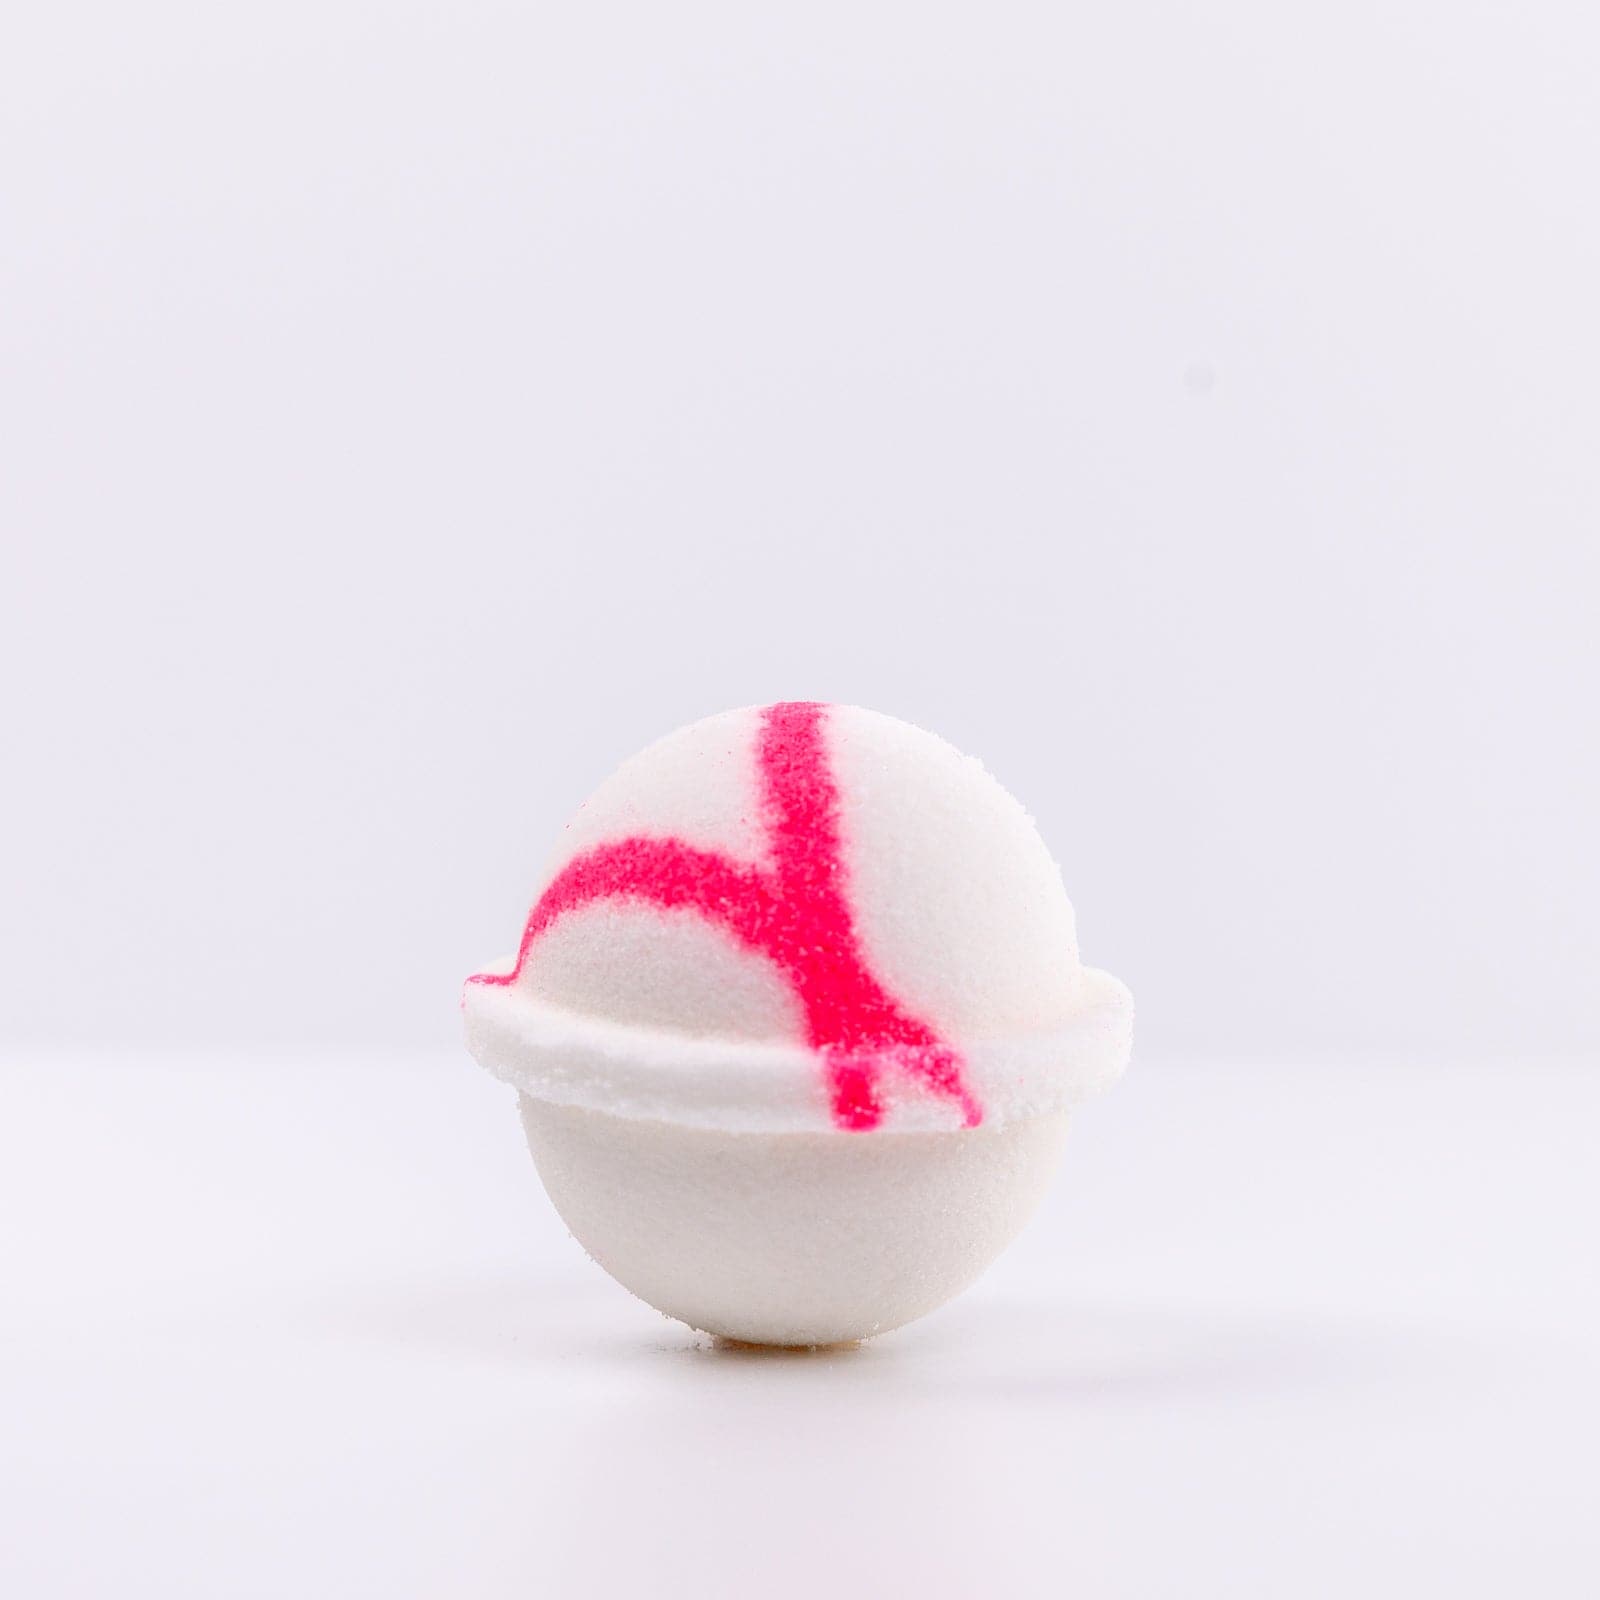 one white Mermaid Bath Bomb with a pink "X" design